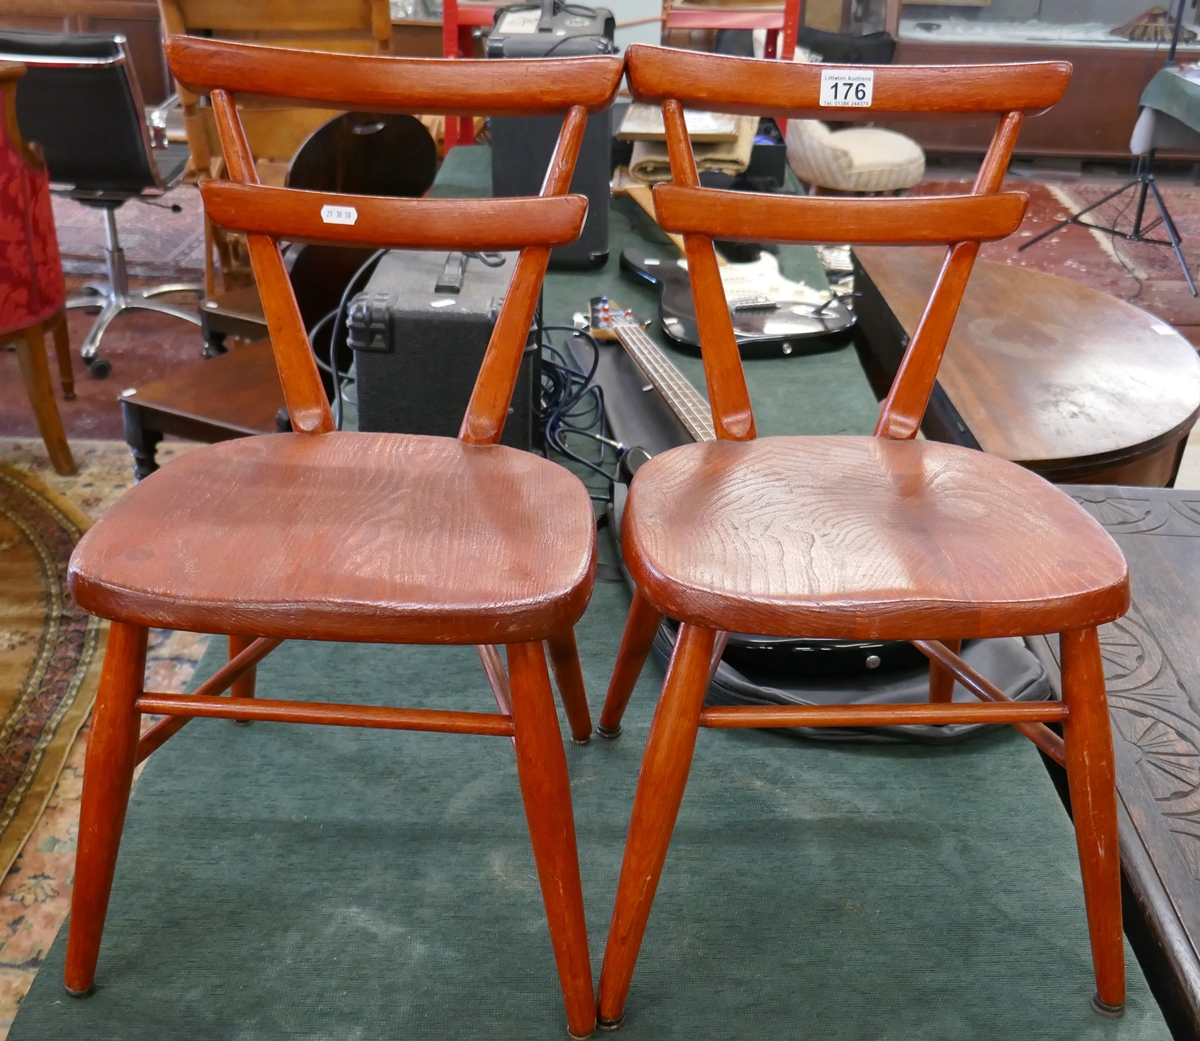 Pair of Ercol child's chairs